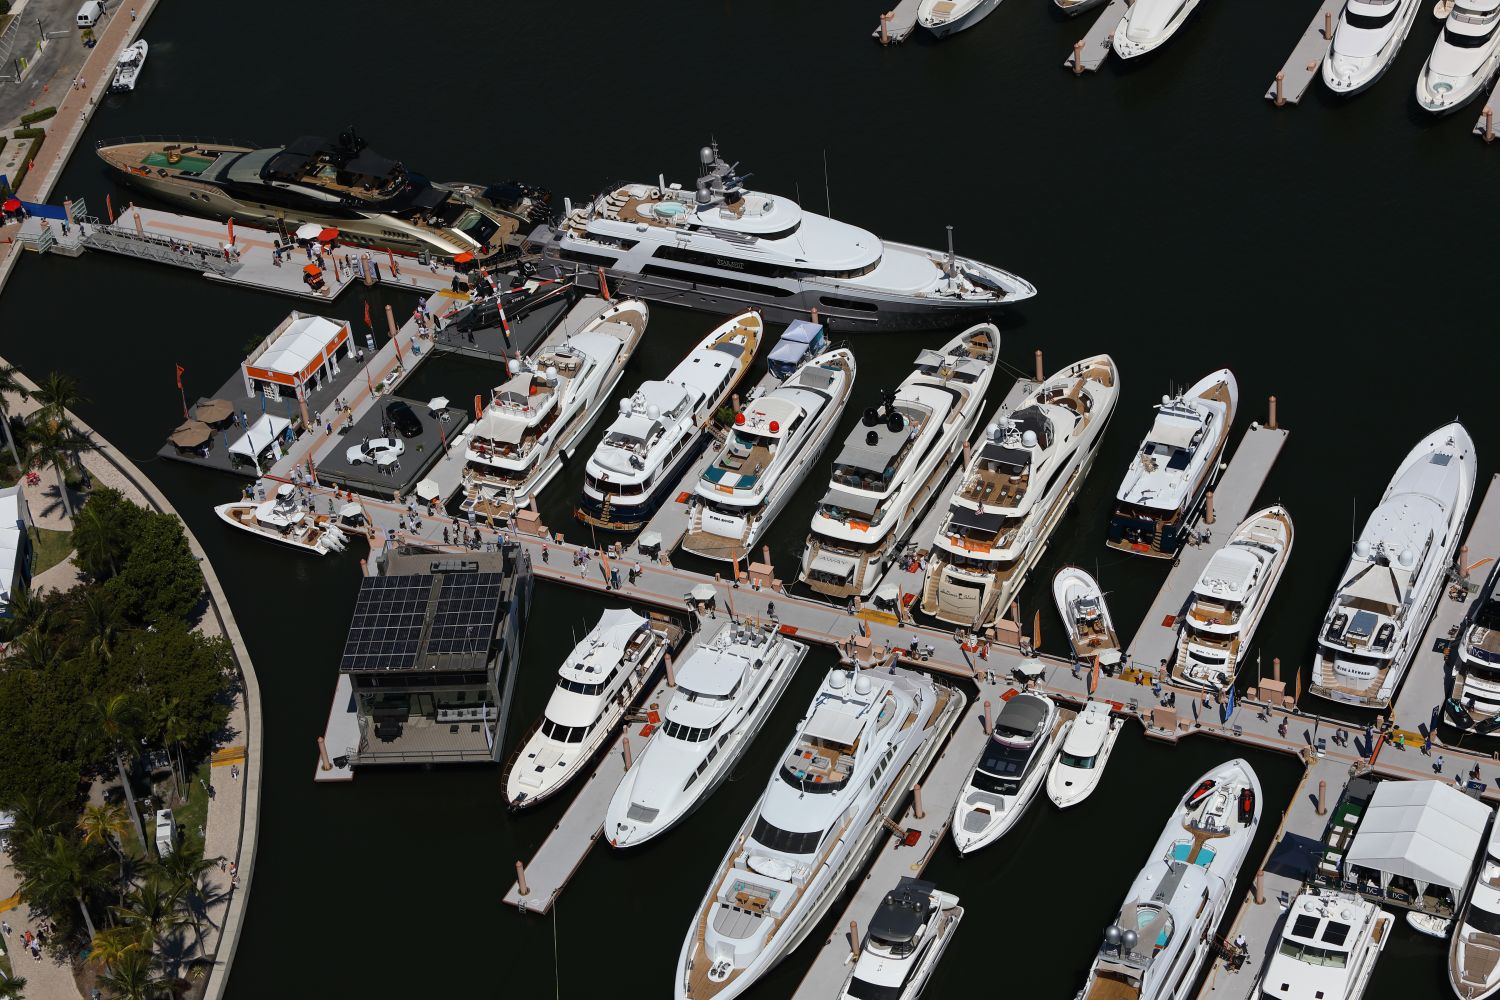 <p>For superyacht shoppers, the Palm Beach International Boat Show, kicking off its four-day run this week, is set to break records with more than 60 yachts over 100 feet long on display. Last year was also a banner year for superyachts at the show. </p> <p>Headliners will include the likes of the 295-foot Corsair Nero,  the 278-foot Victorious by AKYacht, the 230-foot Turquoise-built Talisman C, and 213-foot Benetti Triumph among brokerage yachts, and in new yachts, the 113-foot Ocean Alexander Puro 35 is making its world debut.  </p> <p>There are so many gleaming white vessels over 100 feet, in fact, that the fleet will be split between the Palm Harbor Marina at the main show site on the downtown West Palm Beach waterfront and the Safe Harbor Rybovich Marina two miles north. </p> <p>Now in its 42nd year, PBIBS will also showcase hundreds of models of dayboats, cruisers, and fishing boats, as well as marine accessories. Running from this Thursday through Sunday, the show coincides with the Palm Beach Modern + Contemporary art show, a fortuitous opportunity for yacht owners wanting to add new art to their collections.</p> <p>Here are 10 must-see boats at this year’s show.</p>